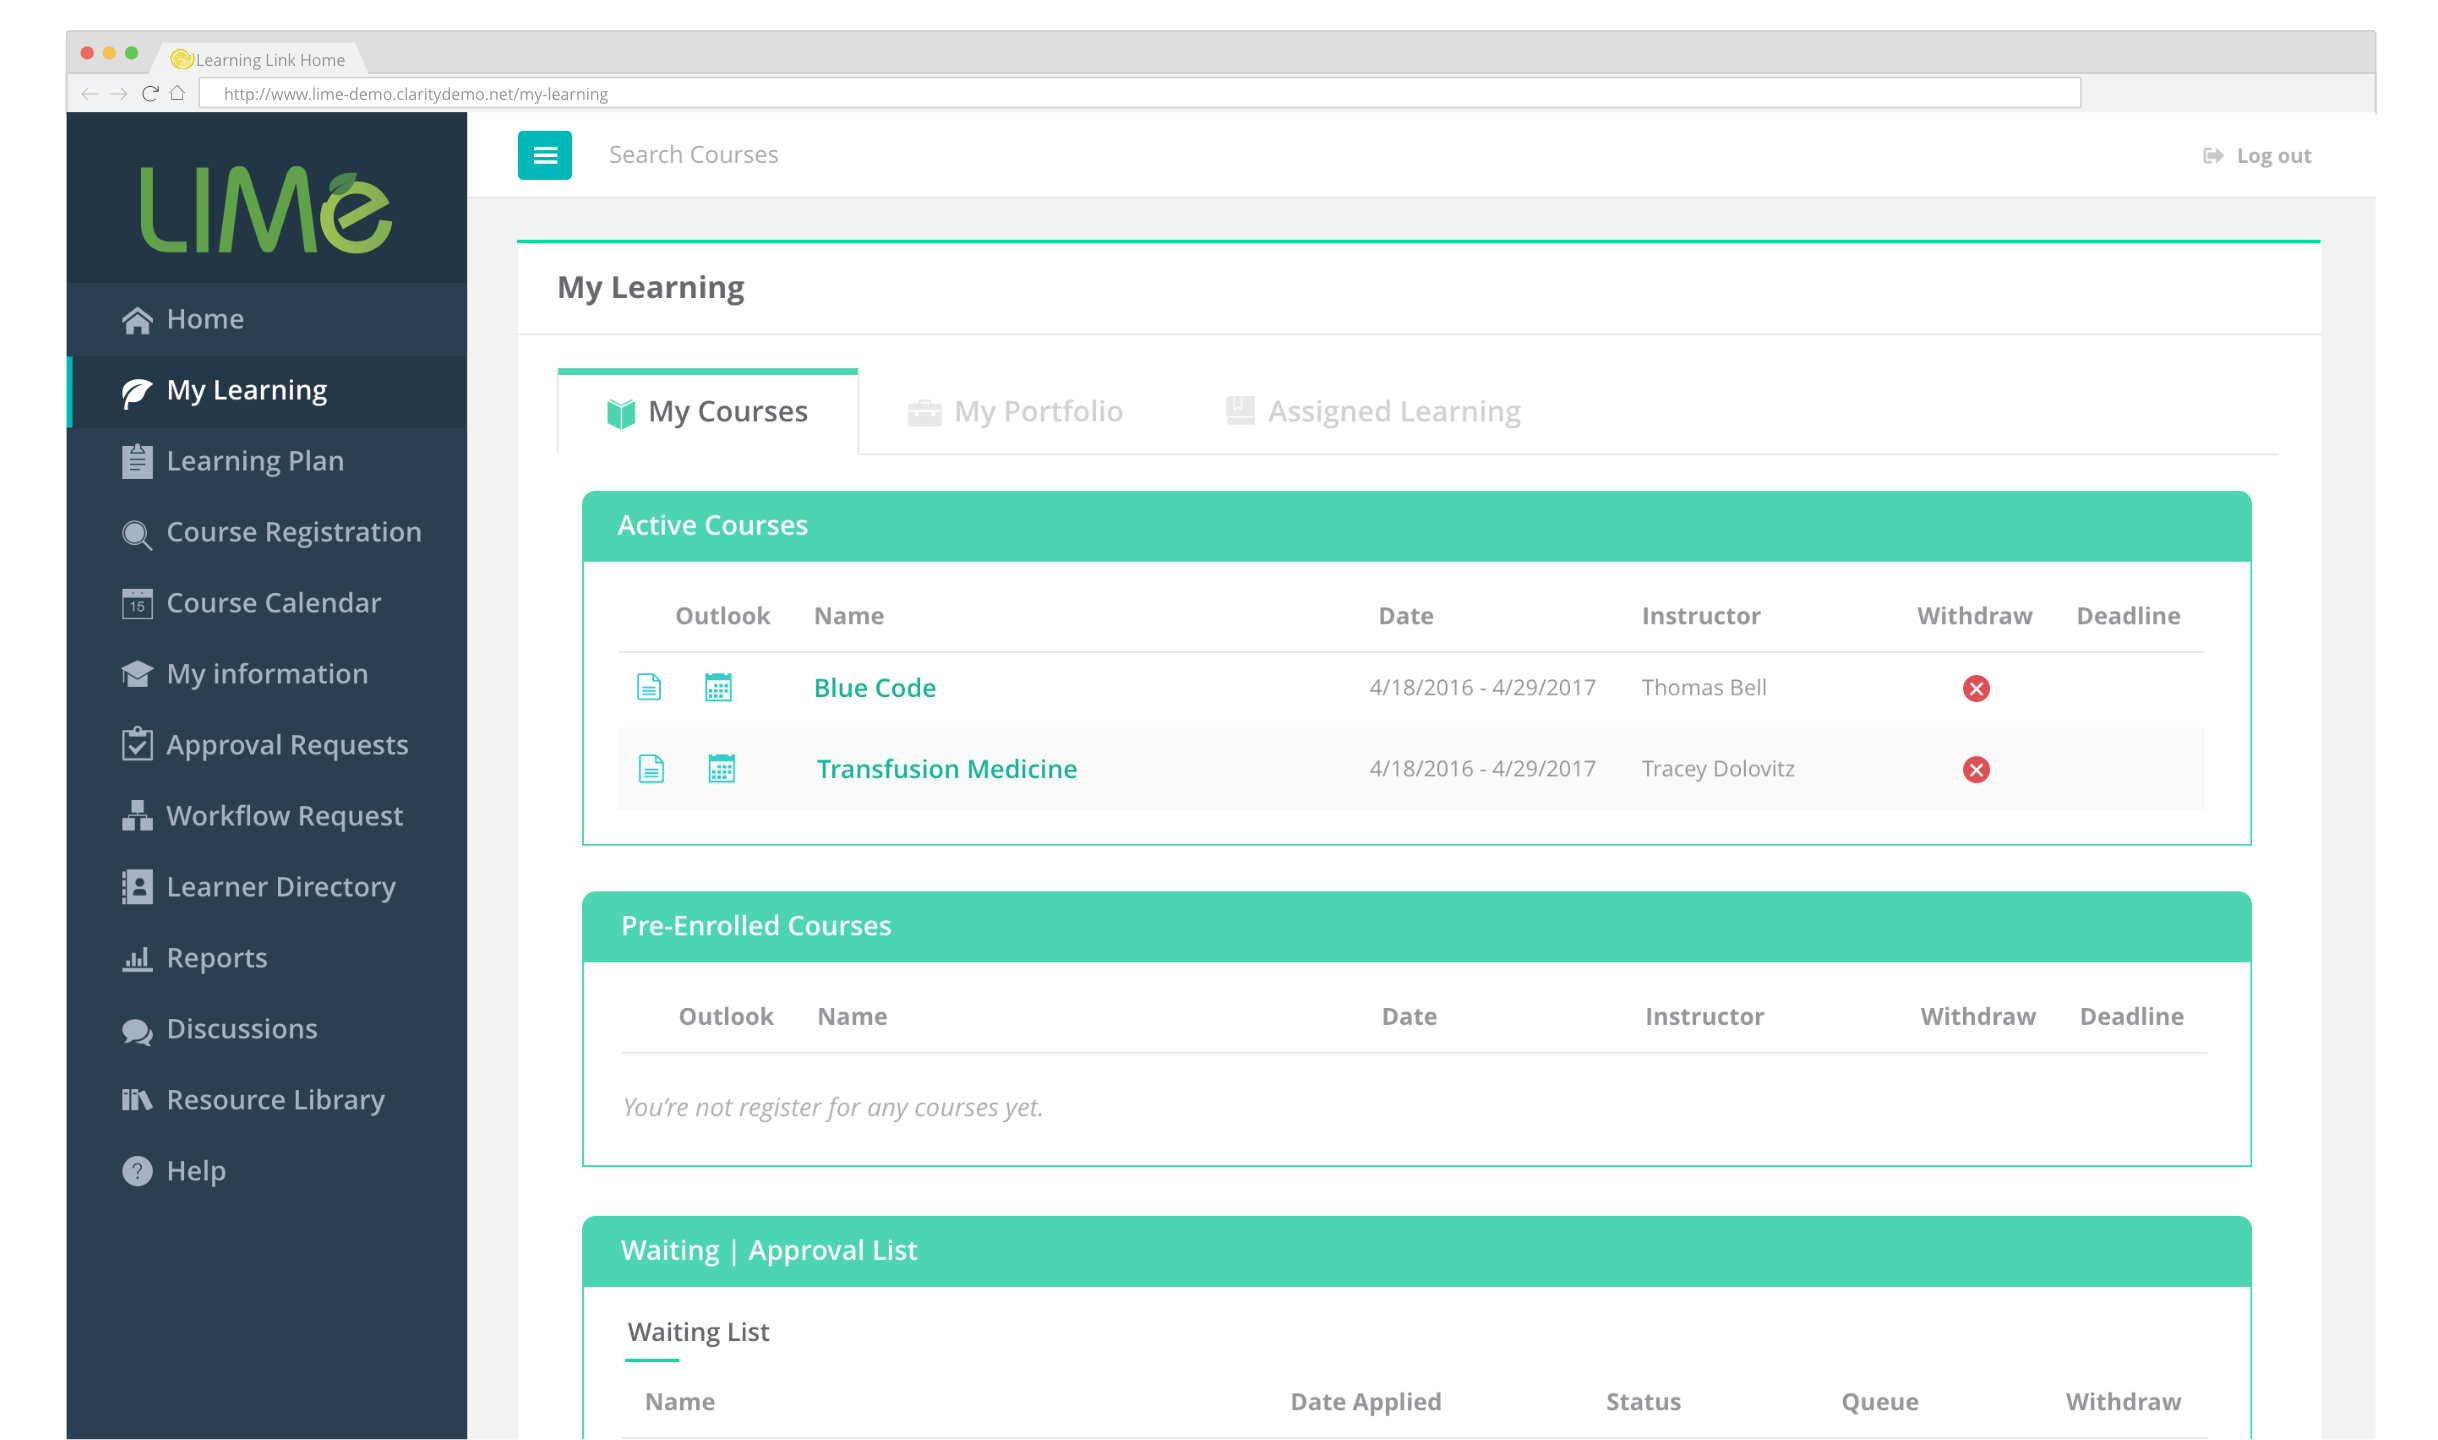 Screenshot of LIMe's My Learning Page